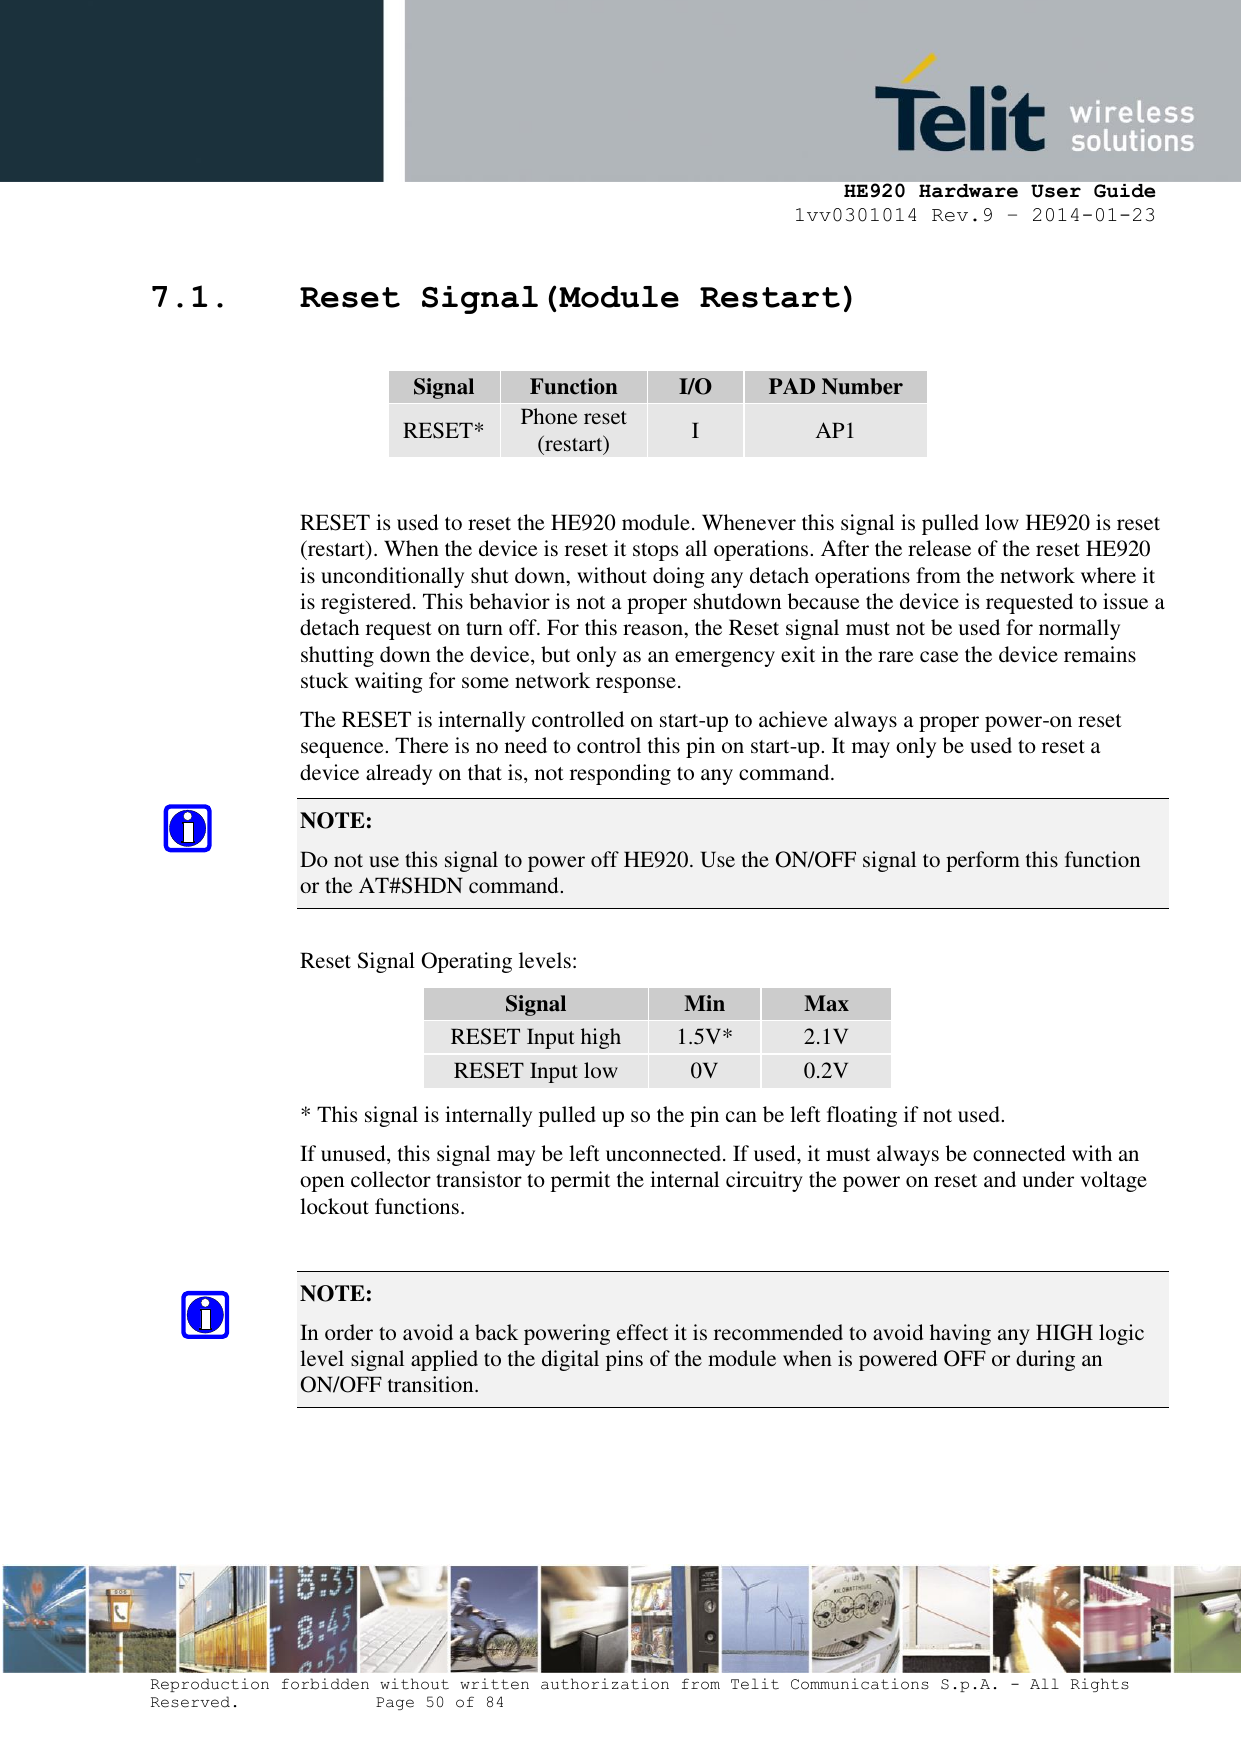     HE920 Hardware User Guide 1vv0301014 Rev.9 – 2014-01-23 Reproduction forbidden without written authorization from Telit Communications S.p.A. - All Rights Reserved.    Page 50 of 84  7.1. Reset Signal(Module Restart)  Signal Function I/O PAD Number RESET* Phone reset (restart) I AP1  RESET is used to reset the HE920 module. Whenever this signal is pulled low HE920 is reset (restart). When the device is reset it stops all operations. After the release of the reset HE920 is unconditionally shut down, without doing any detach operations from the network where it is registered. This behavior is not a proper shutdown because the device is requested to issue a detach request on turn off. For this reason, the Reset signal must not be used for normally shutting down the device, but only as an emergency exit in the rare case the device remains stuck waiting for some network response. The RESET is internally controlled on start-up to achieve always a proper power-on reset sequence. There is no need to control this pin on start-up. It may only be used to reset a device already on that is, not responding to any command. NOTE:  Do not use this signal to power off HE920. Use the ON/OFF signal to perform this function or the AT#SHDN command.  Reset Signal Operating levels: Signal Min Max RESET Input high 1.5V* 2.1V RESET Input low 0V 0.2V * This signal is internally pulled up so the pin can be left floating if not used. If unused, this signal may be left unconnected. If used, it must always be connected with an open collector transistor to permit the internal circuitry the power on reset and under voltage lockout functions.  NOTE:  In order to avoid a back powering effect it is recommended to avoid having any HIGH logic level signal applied to the digital pins of the module when is powered OFF or during an ON/OFF transition.  